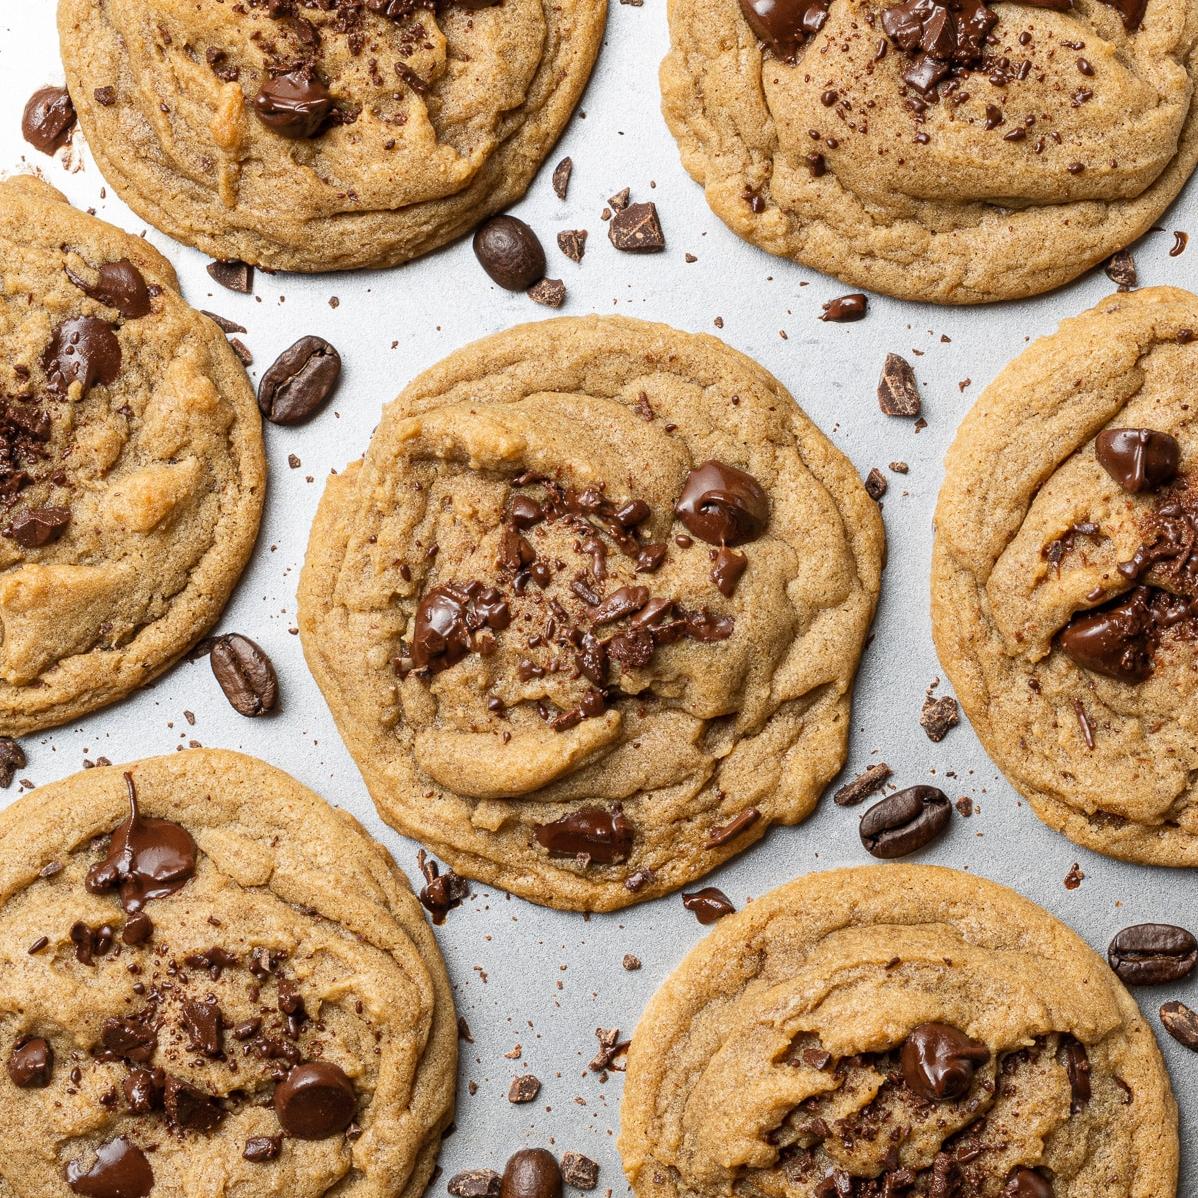  Why have just coffee or just cookies when you can have both in one bite?